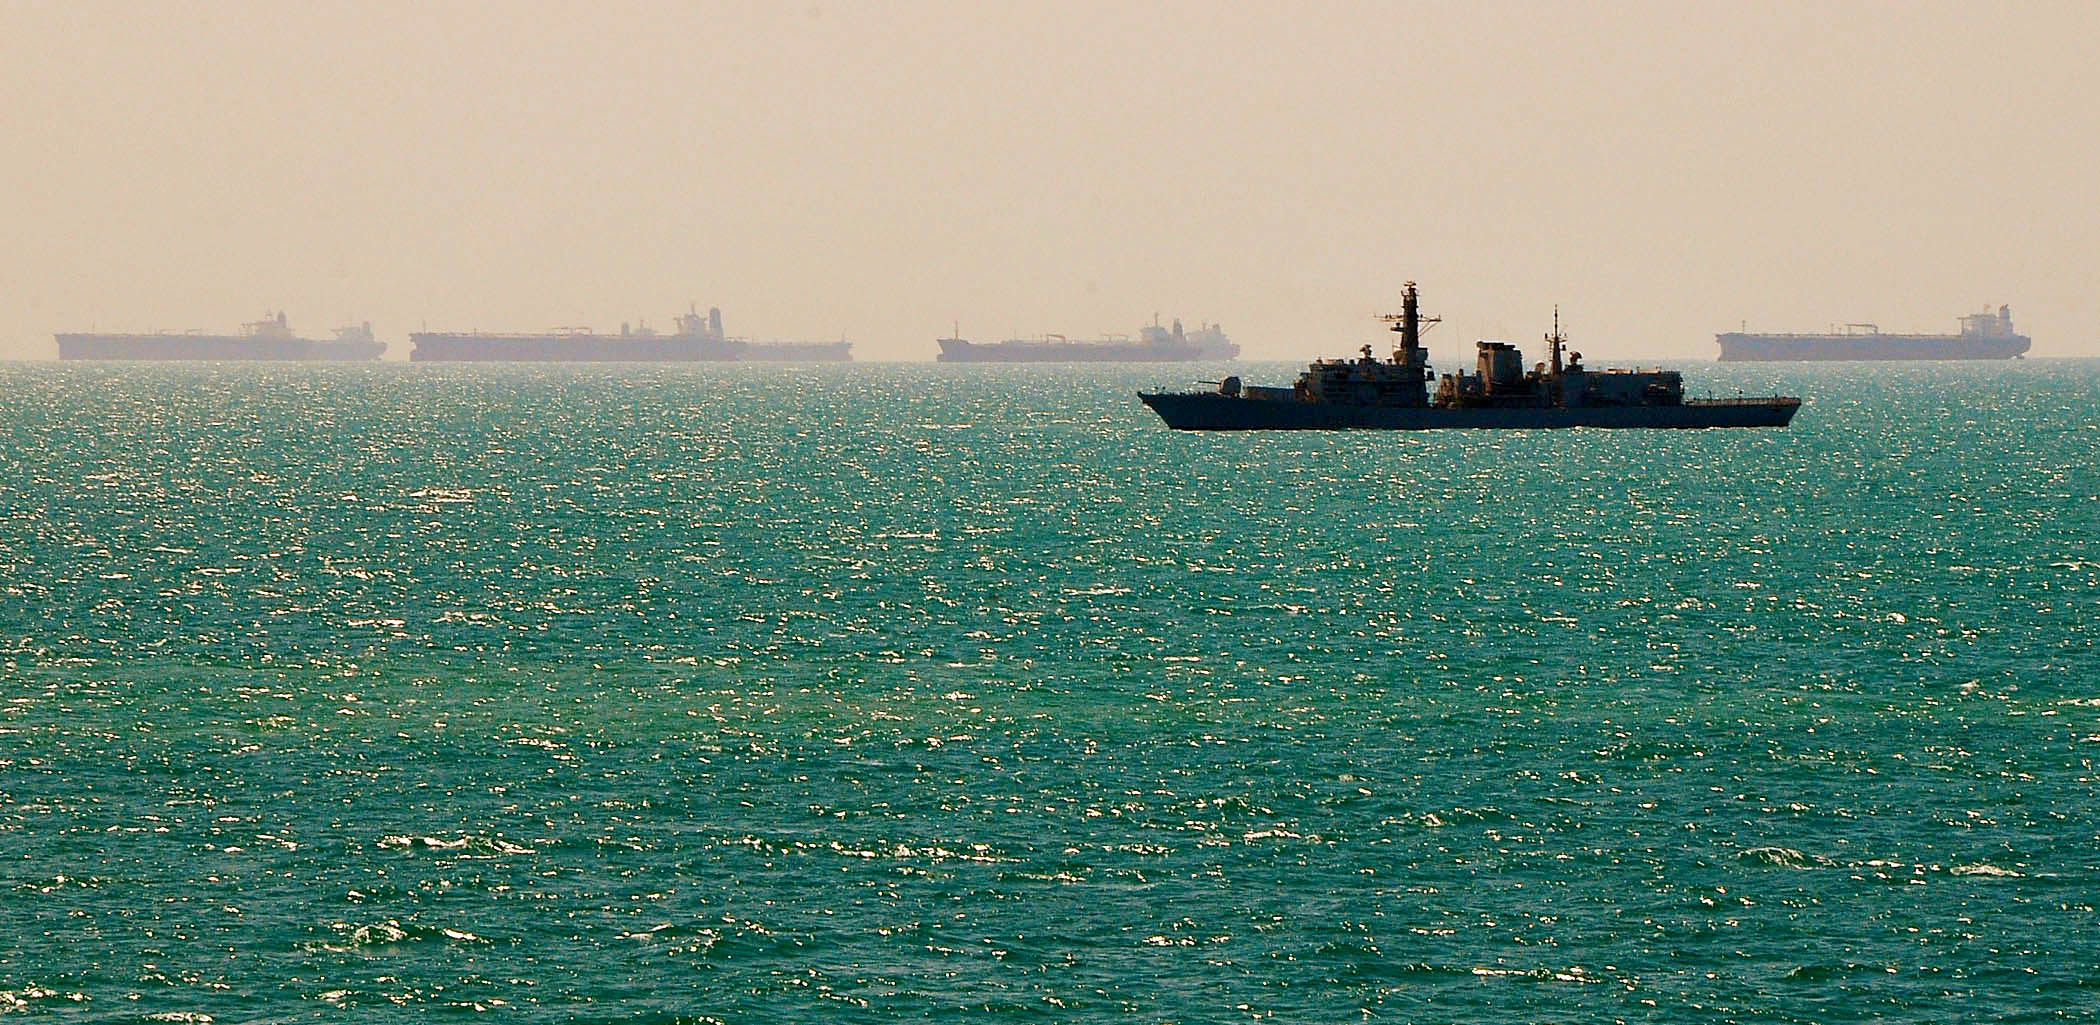 US_Navy_090326-N-4774B-125_The_Royal_Navy_frigate_HMS_Richmond_%28F_239%29_patrols_the_waters_surrounding_the_Al_Basra_Oil_Terminal_off_the_coast_of_Iraq_while_merchant_vessels_wait_to_take_on_oil.jpg